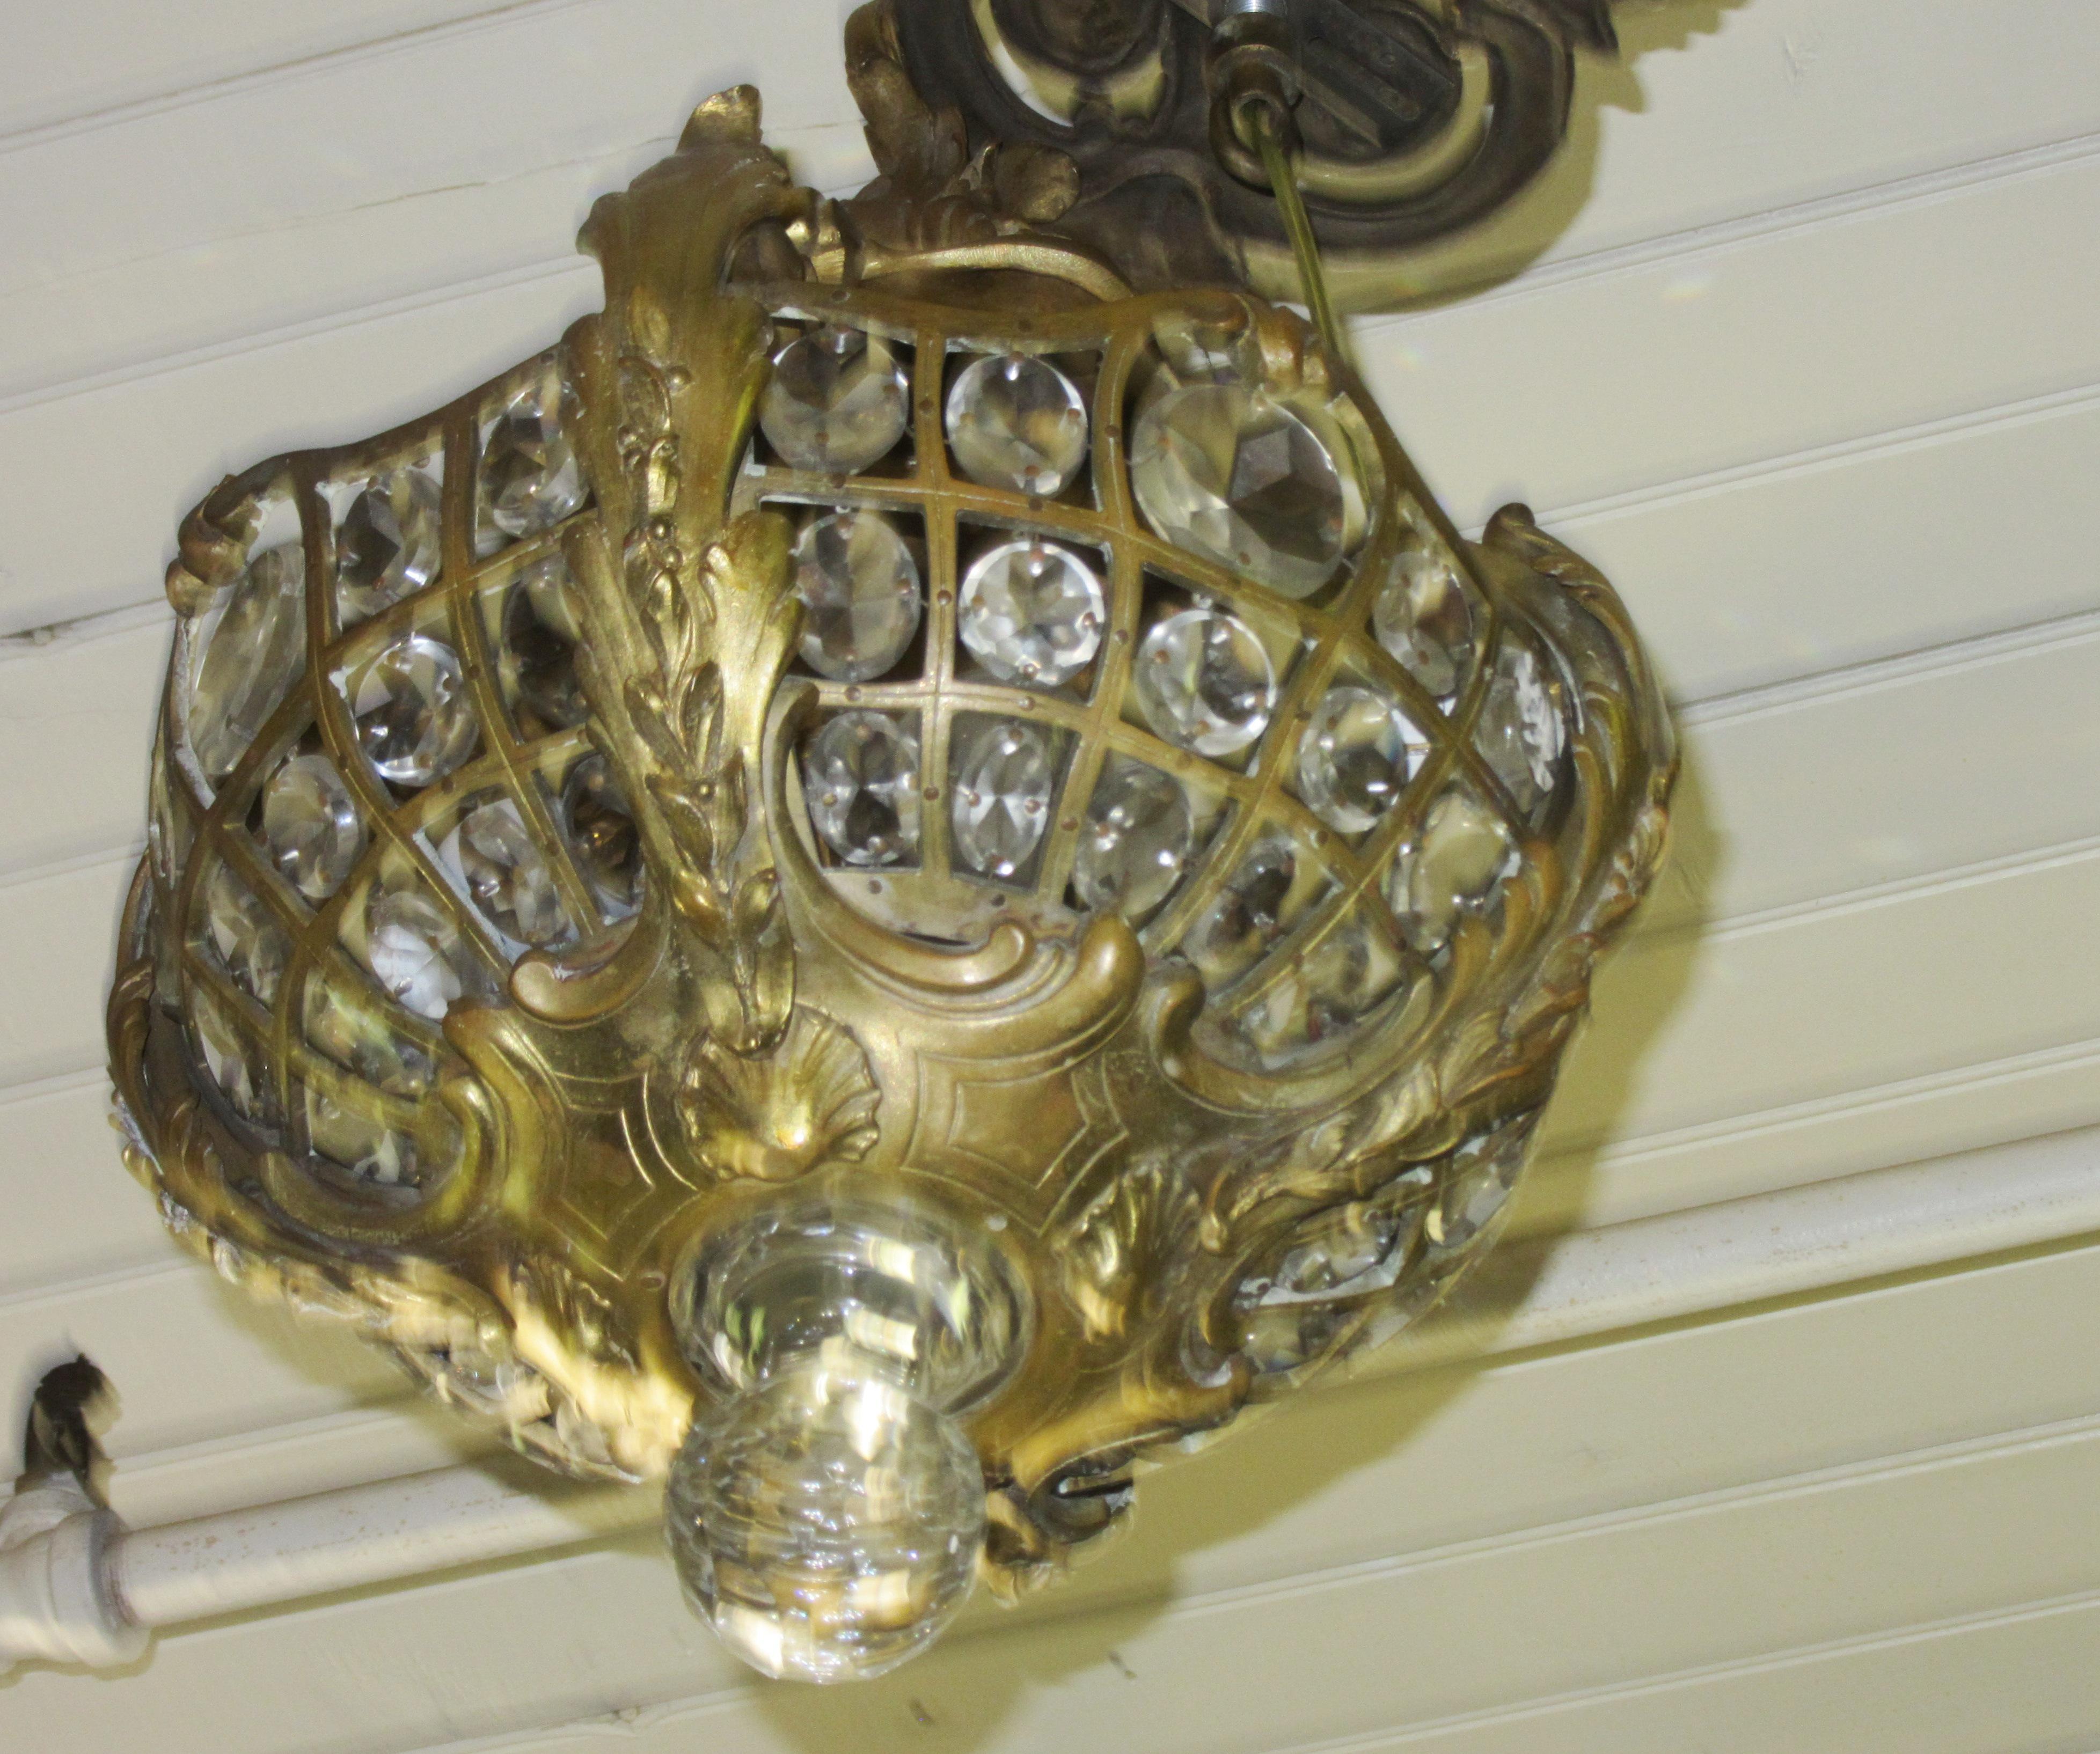 French Louis XV style gilt bronze chandelier pendant with four interior lights and cut crystal prisms. The piece was made in France during the Belle Époque of the 1900s and has been restored and rewired.
Measures: Height 20